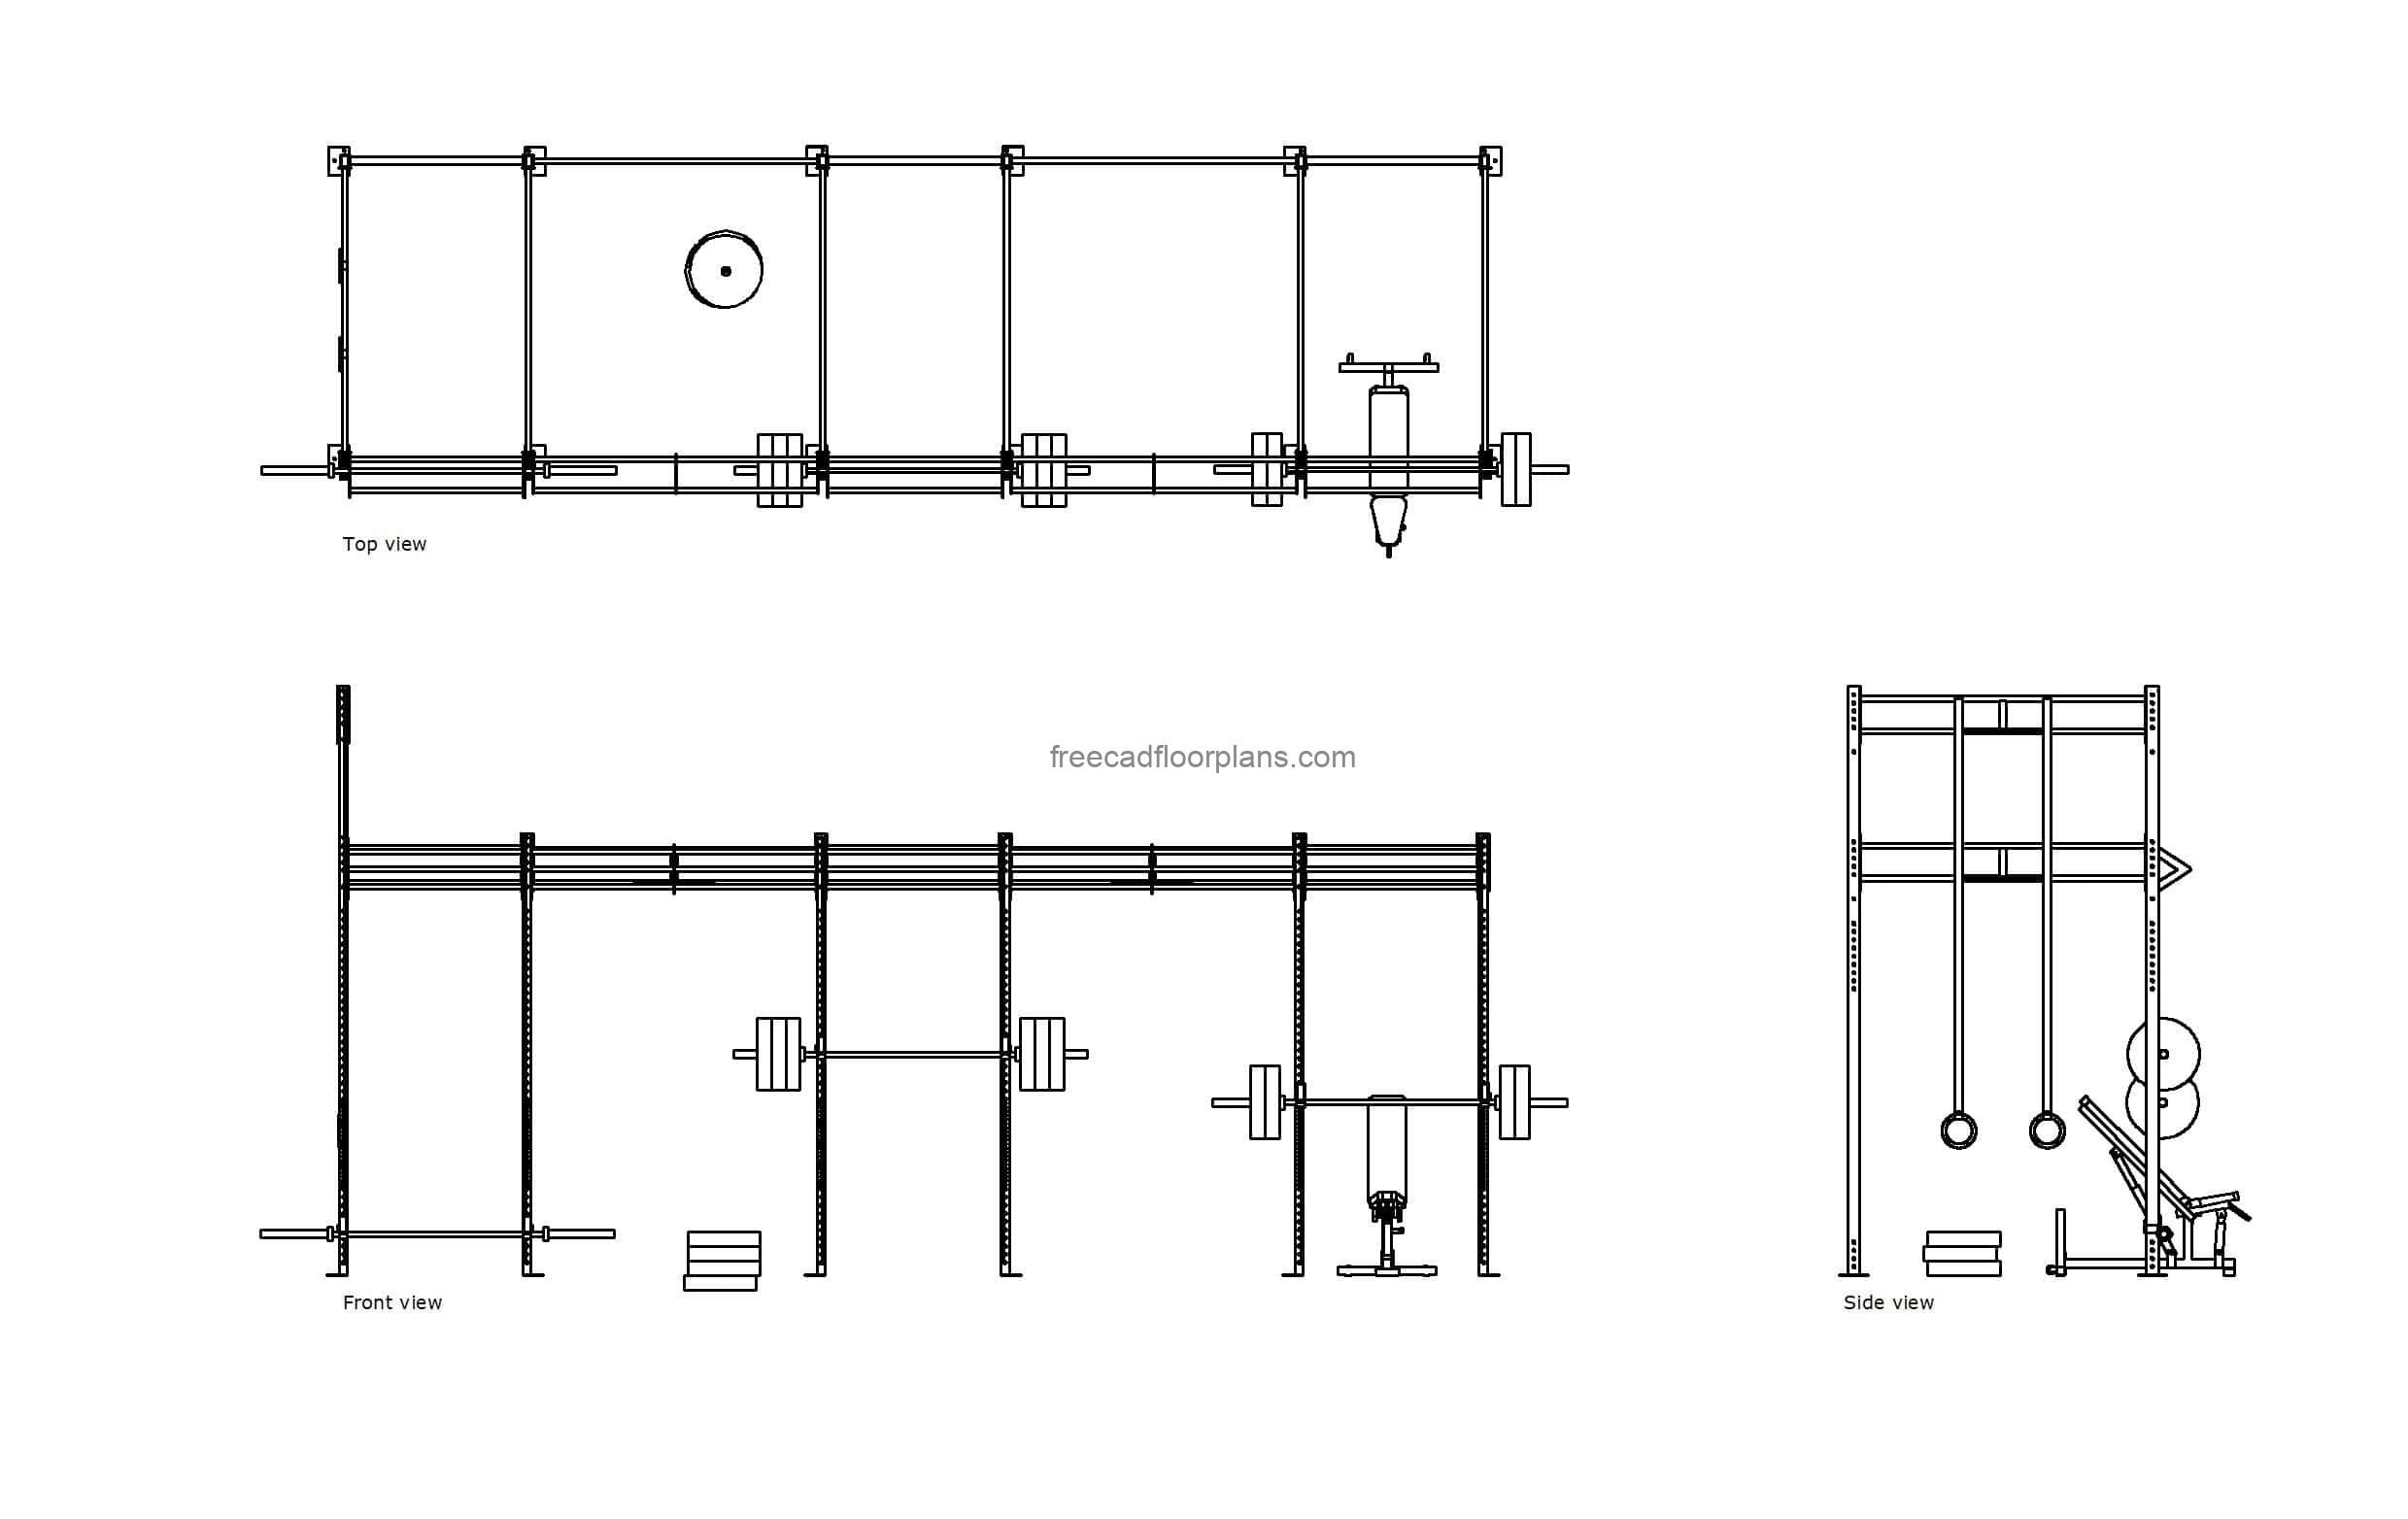 autocad drawing ofa rogue crossfit gym and equipment, plan and elevation 2d views, dwg file free for download